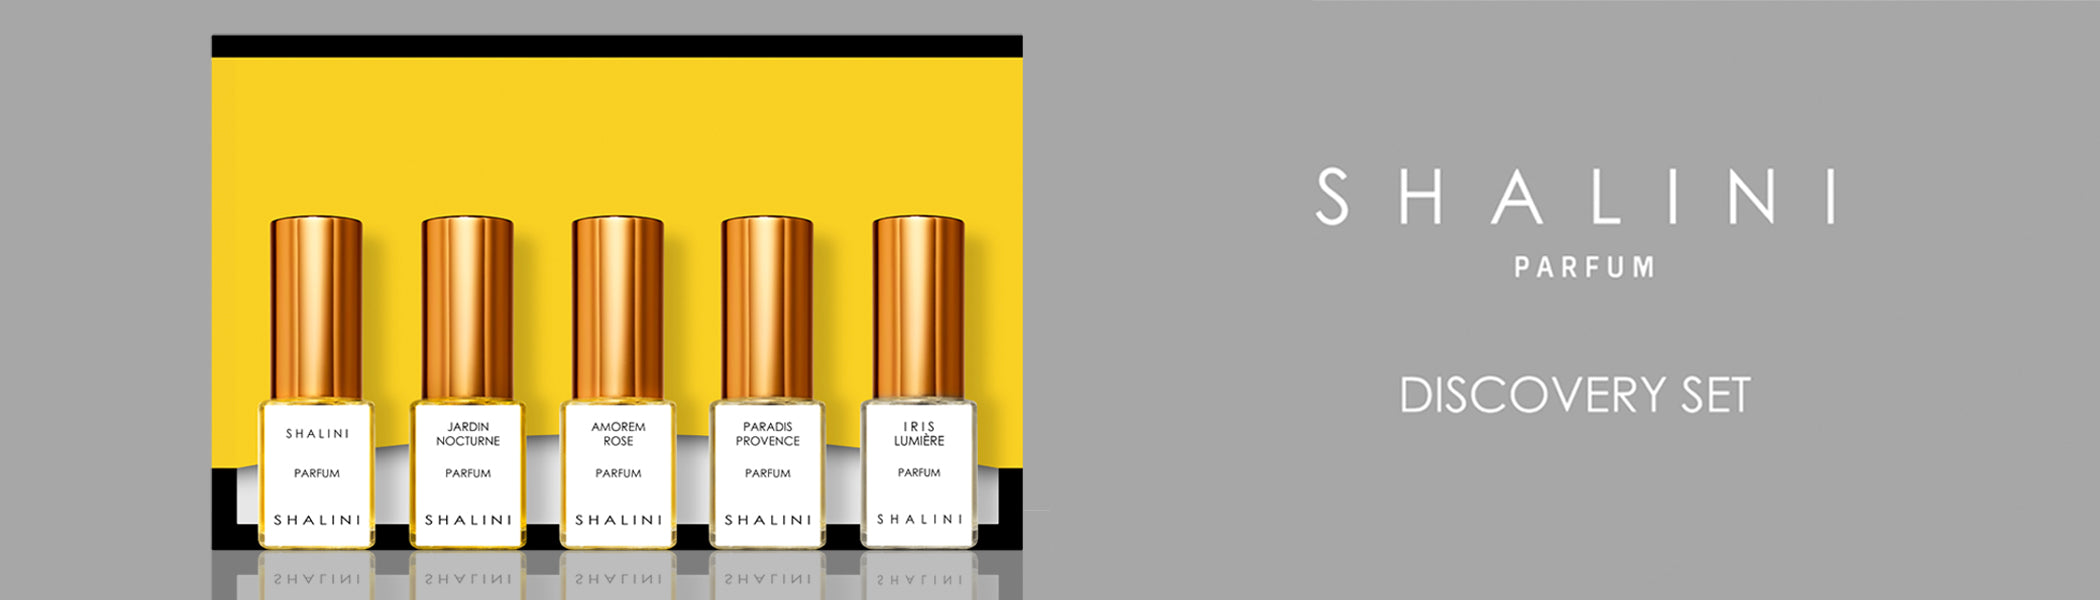 Shalini Parfums Discovery Set Collection | Neverabore.com